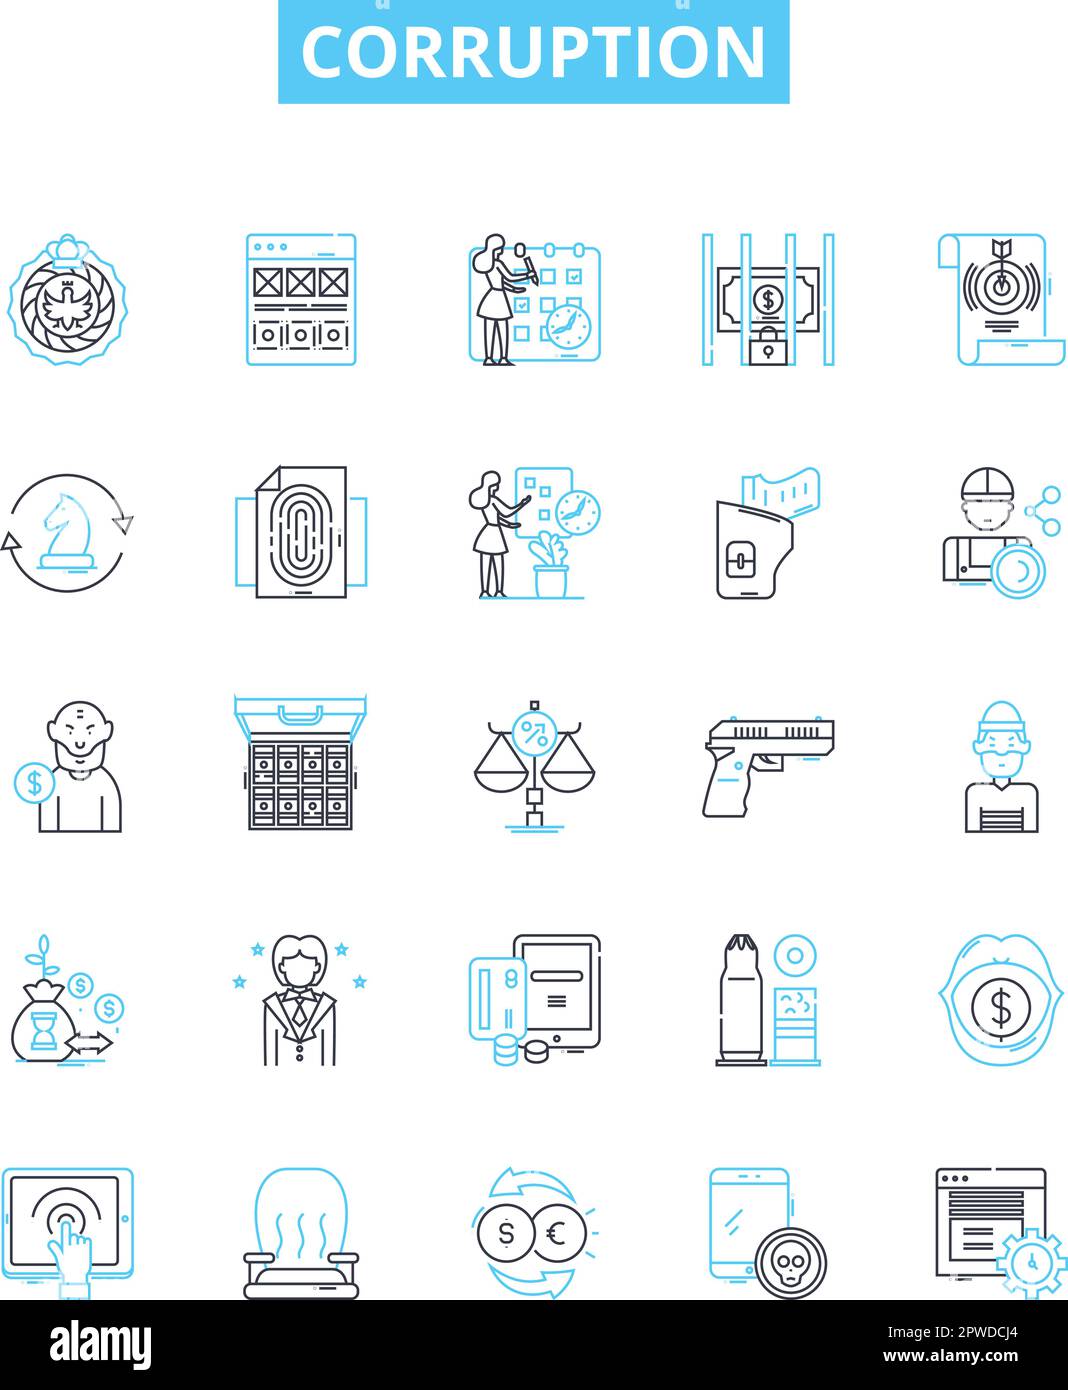 Corruption vector line icons set. Corrupt, Bribery, Misappropriation, Fraud, Graft, Misuse, Misrule illustration outline concept symbols and signs Stock Vector